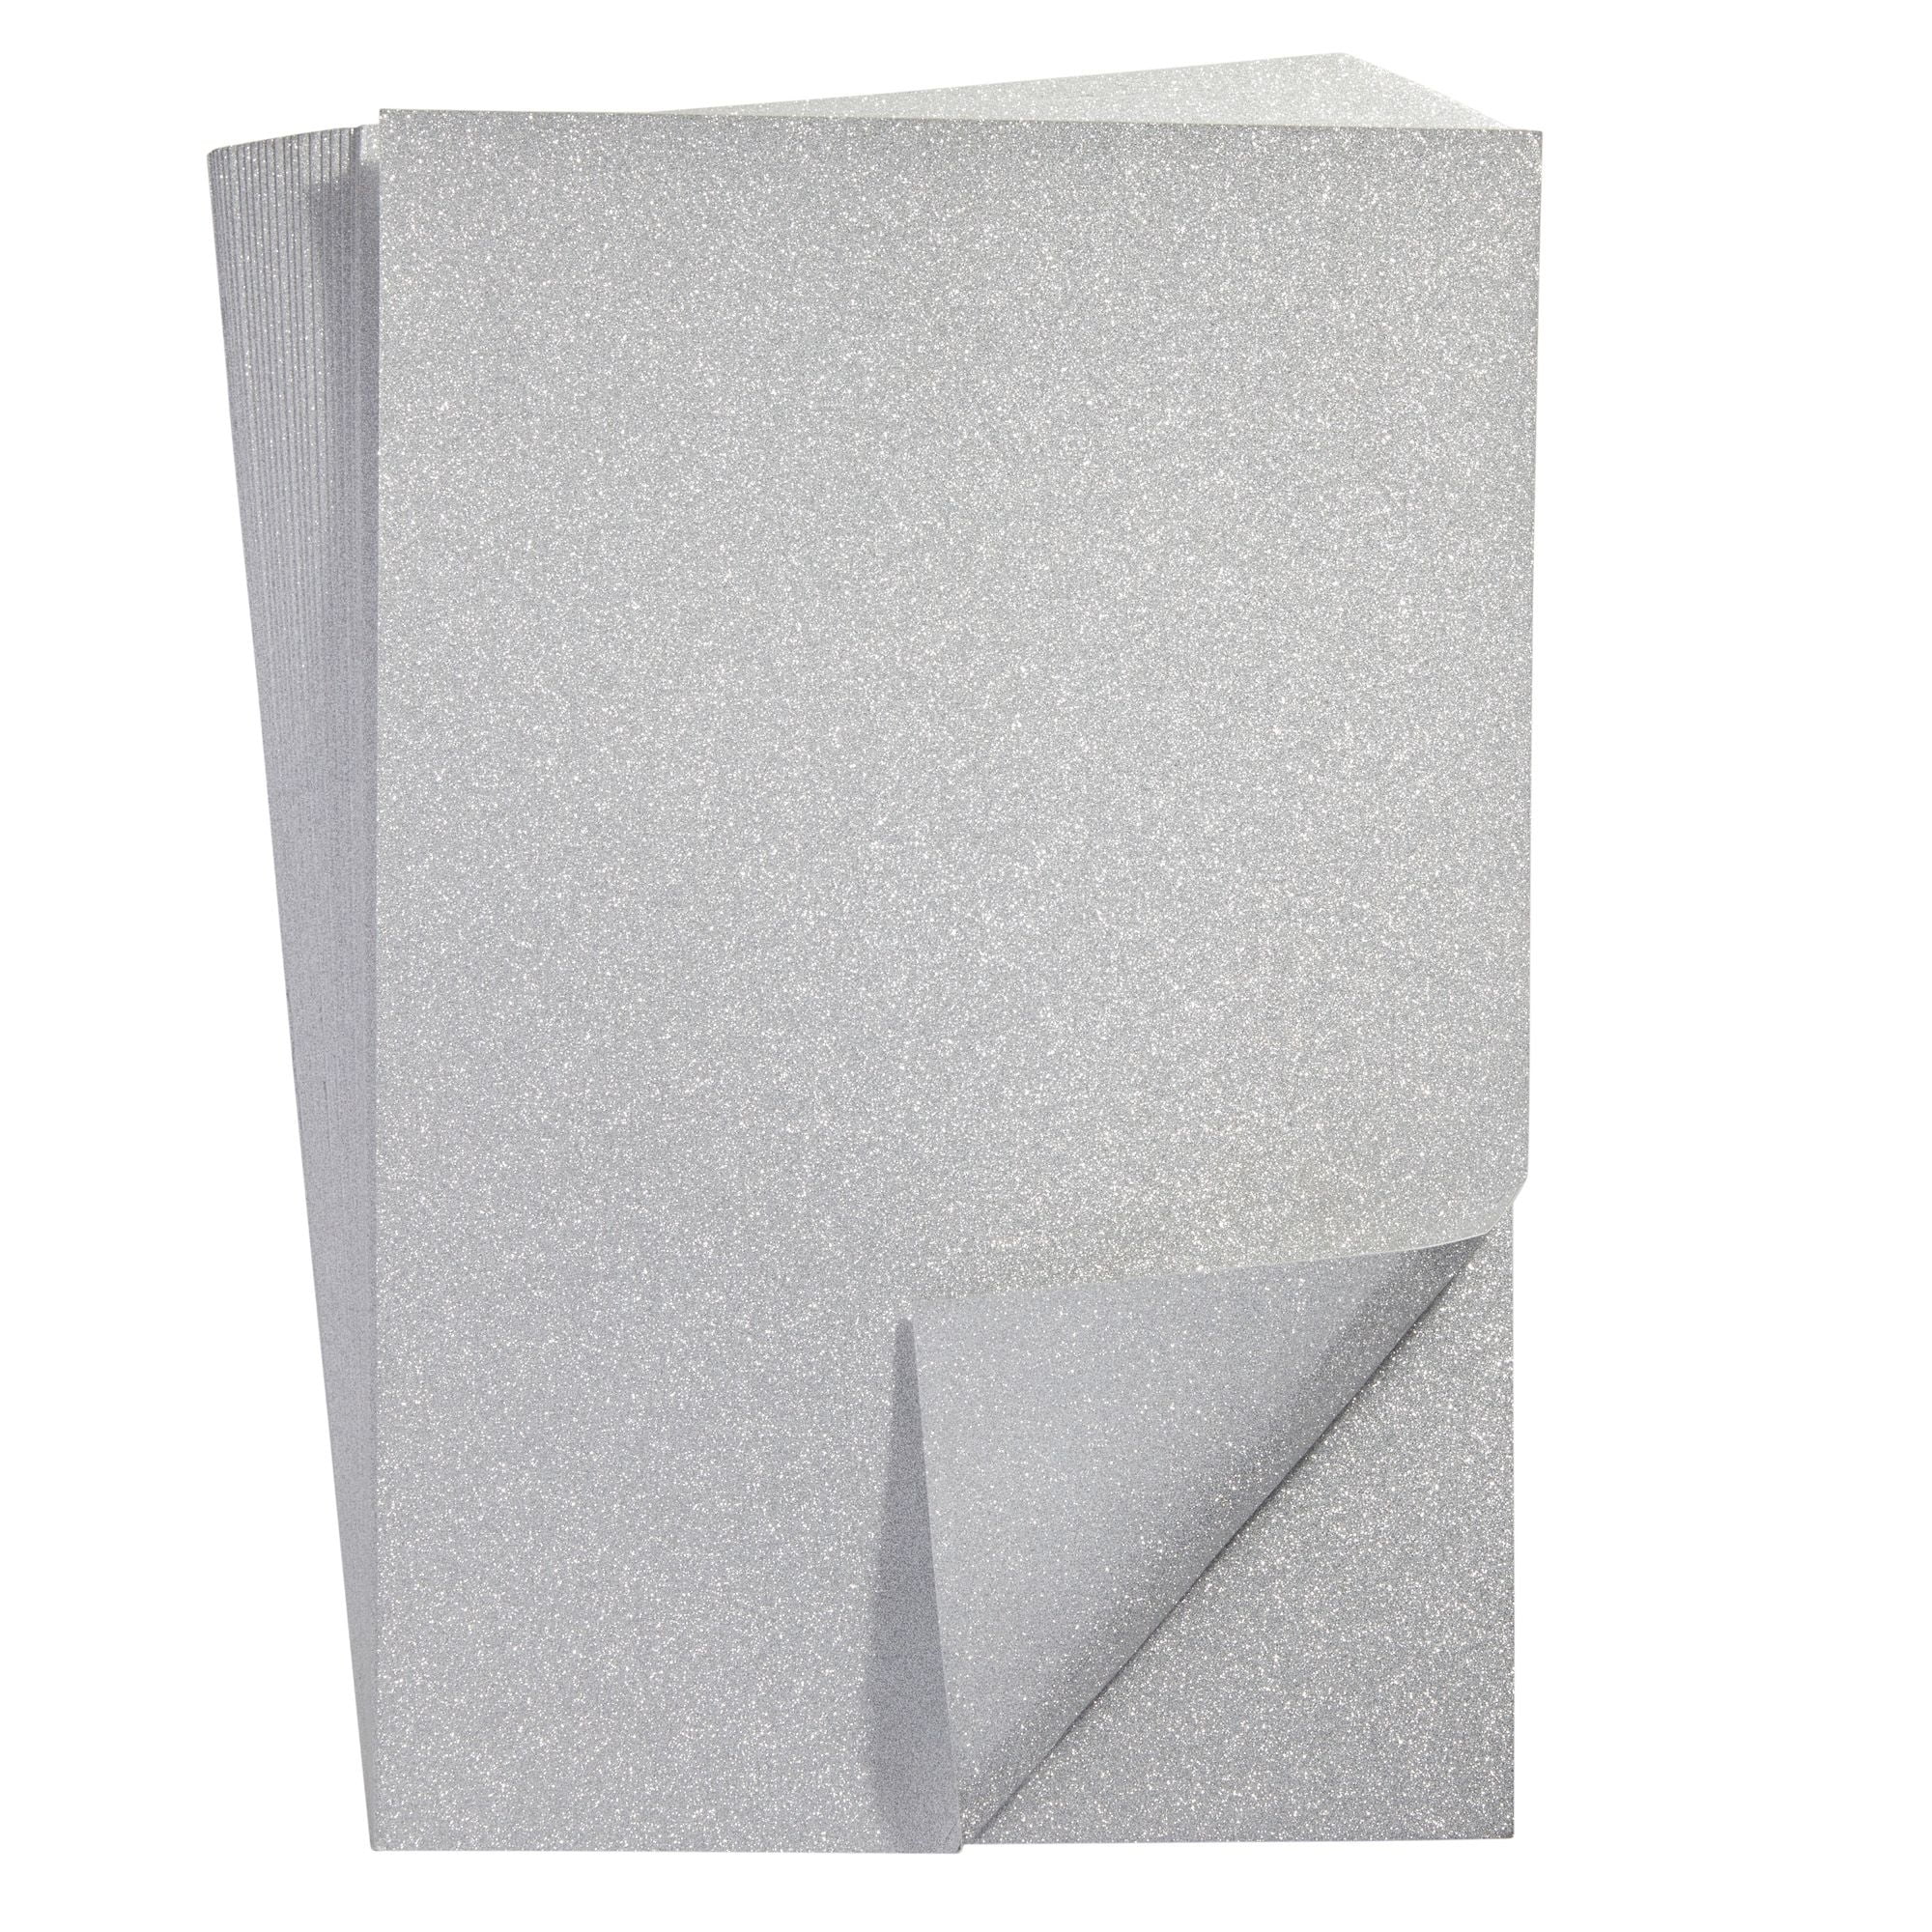 MirriSparkle Silver Glitter Cardstock Paper from Cardstock Warehouse 8.5 x 11 inch- 16 Pt/280gsm - 10 Sheets